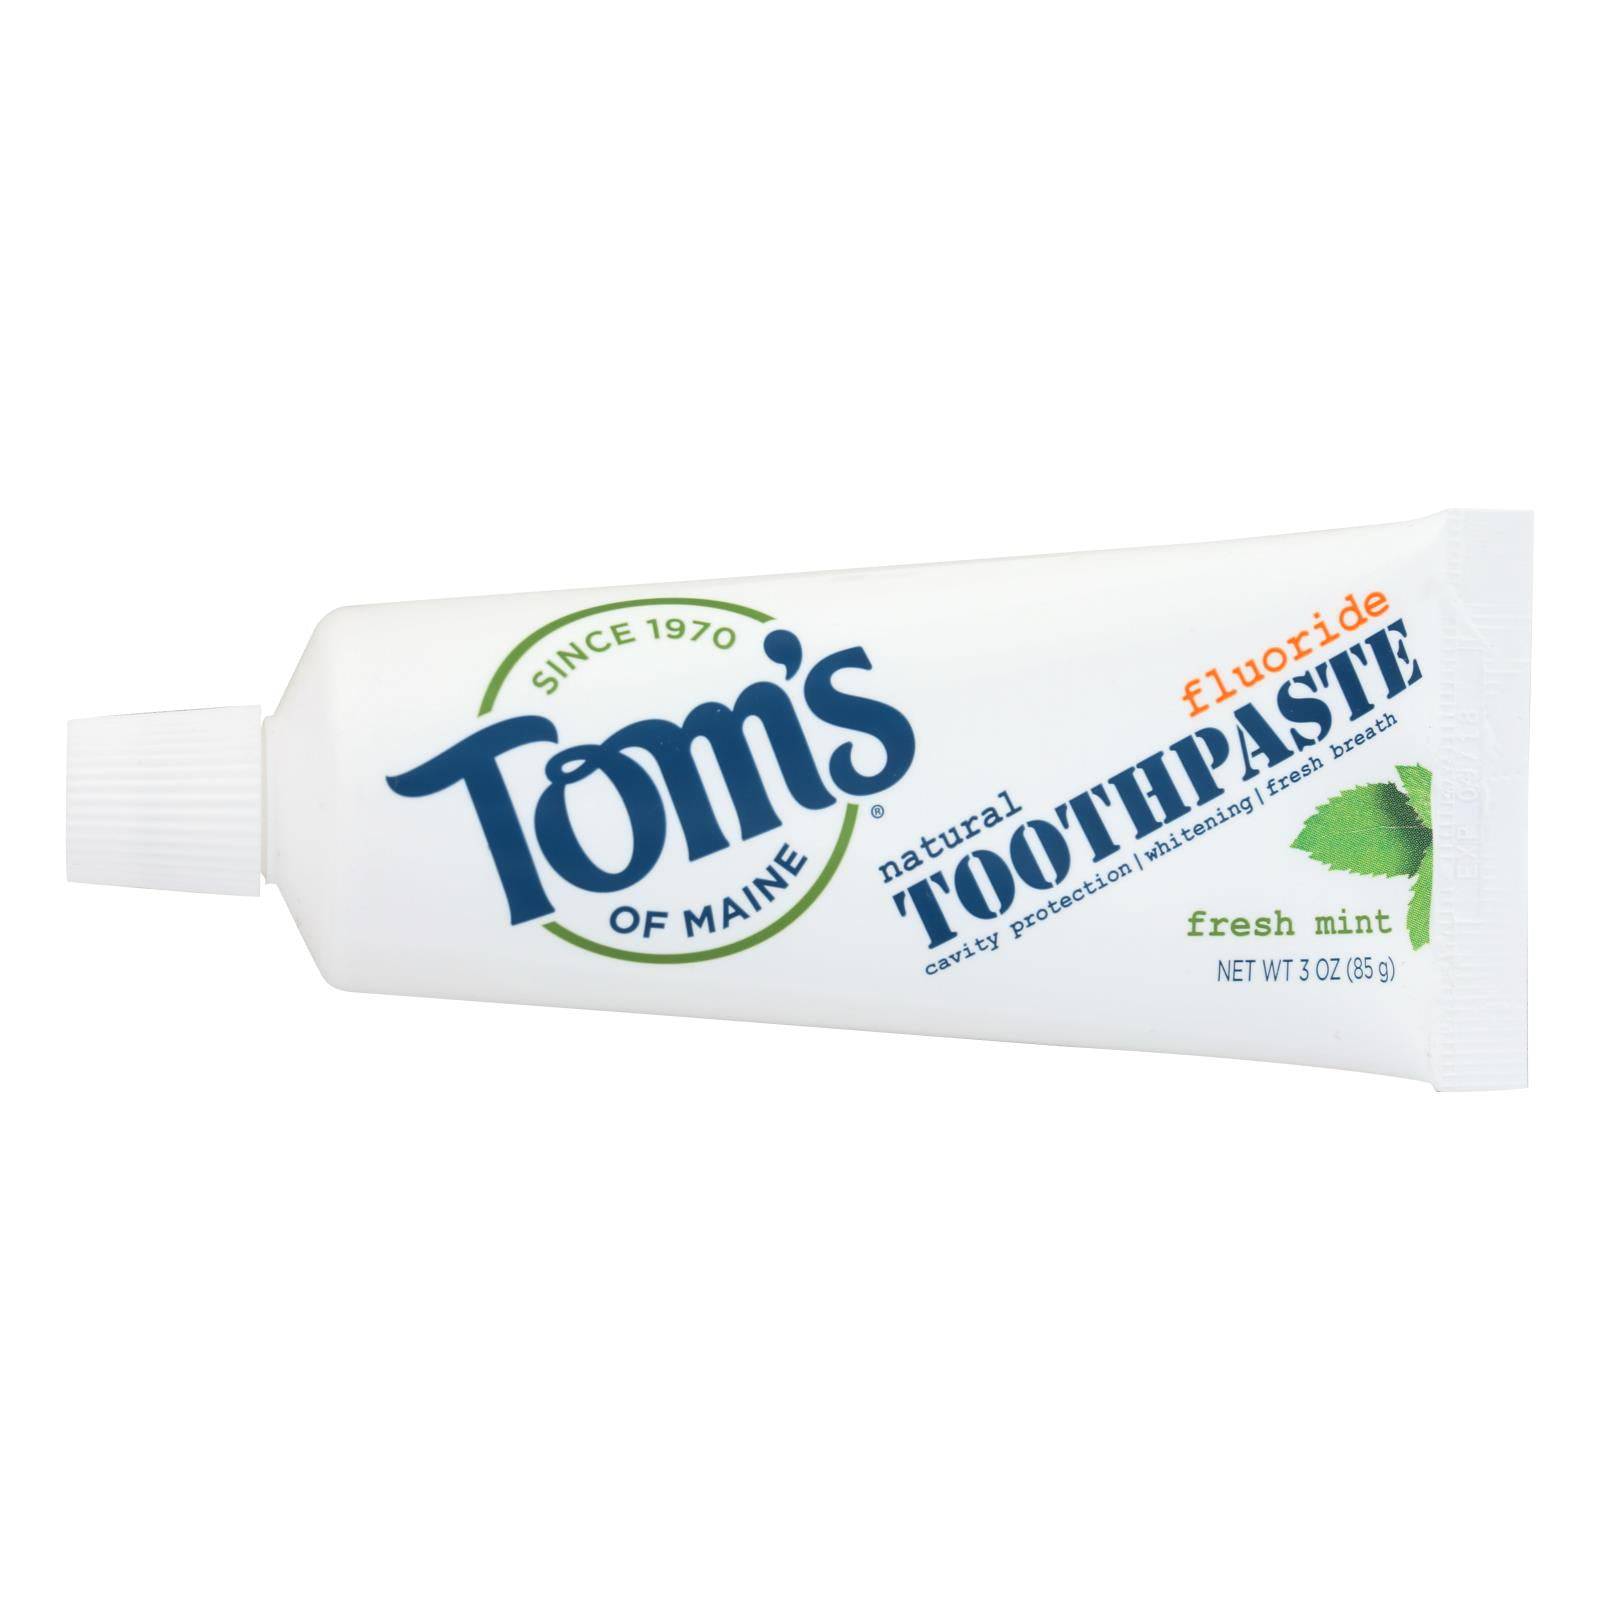 Tom's Of Maine Travel Natural Toothpaste - Fresh Mint Fluoride - Case Of 24 - 3 Oz. | OnlyNaturals.us